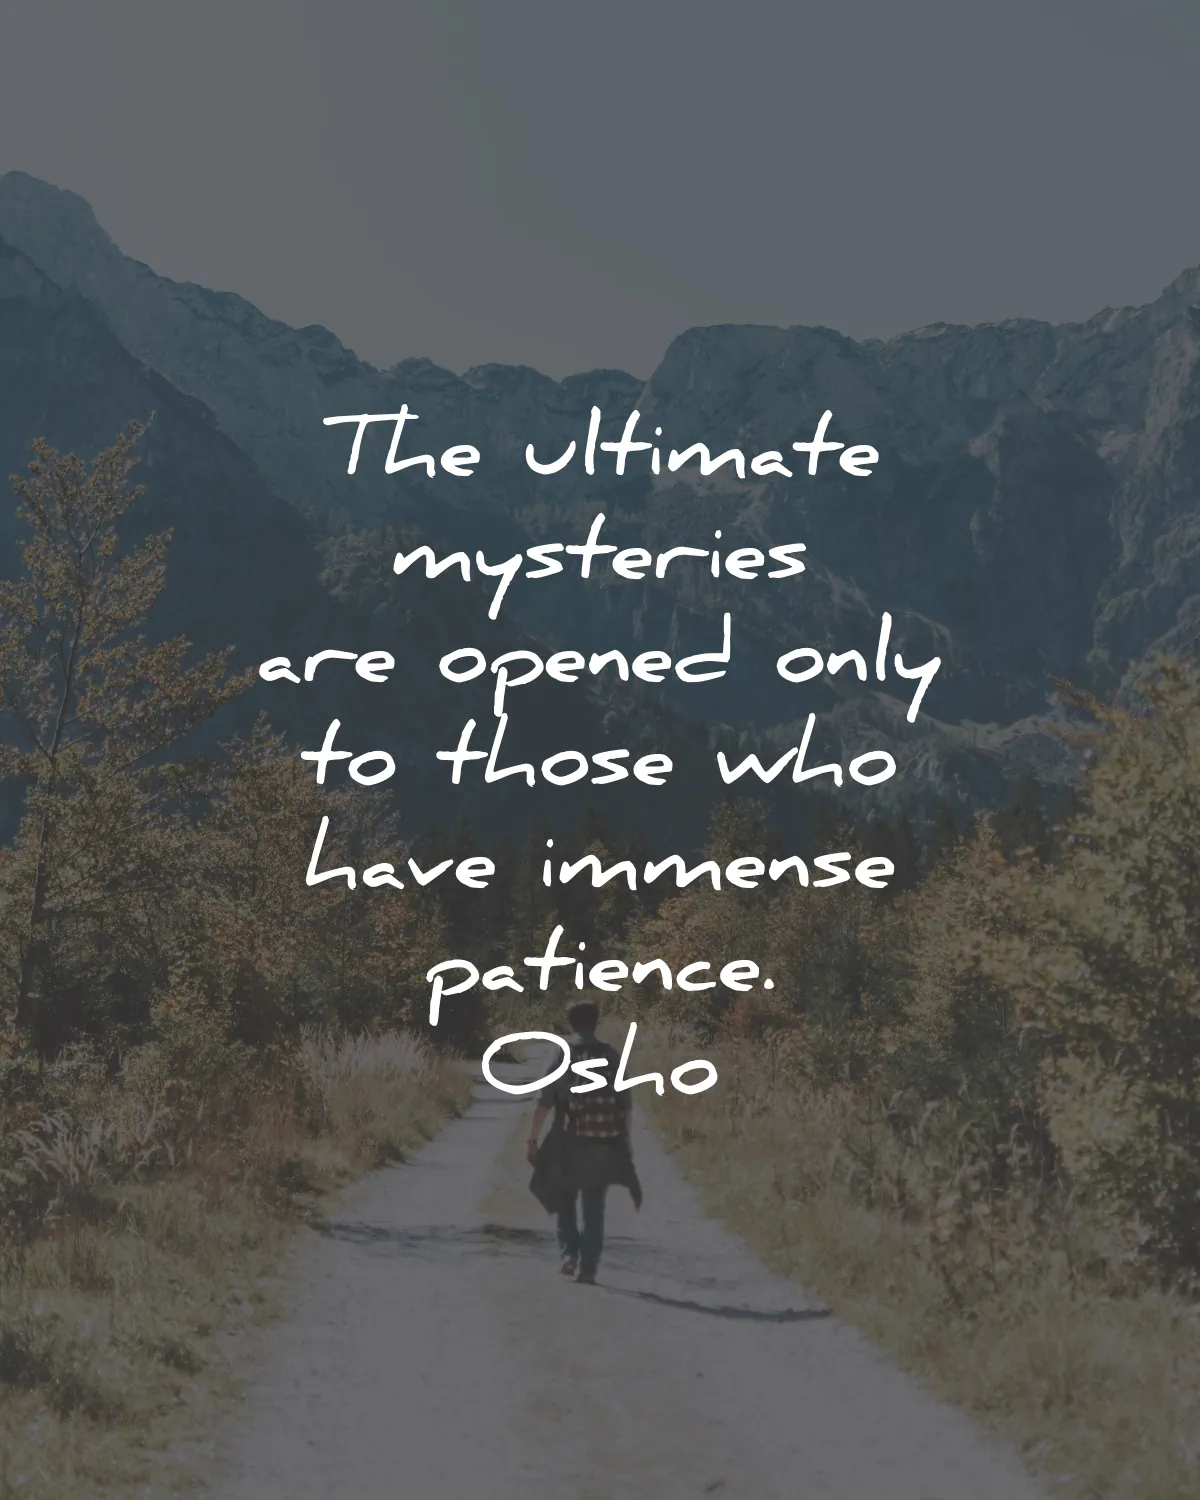 osho quotes mysteries opened immense patience wisdom